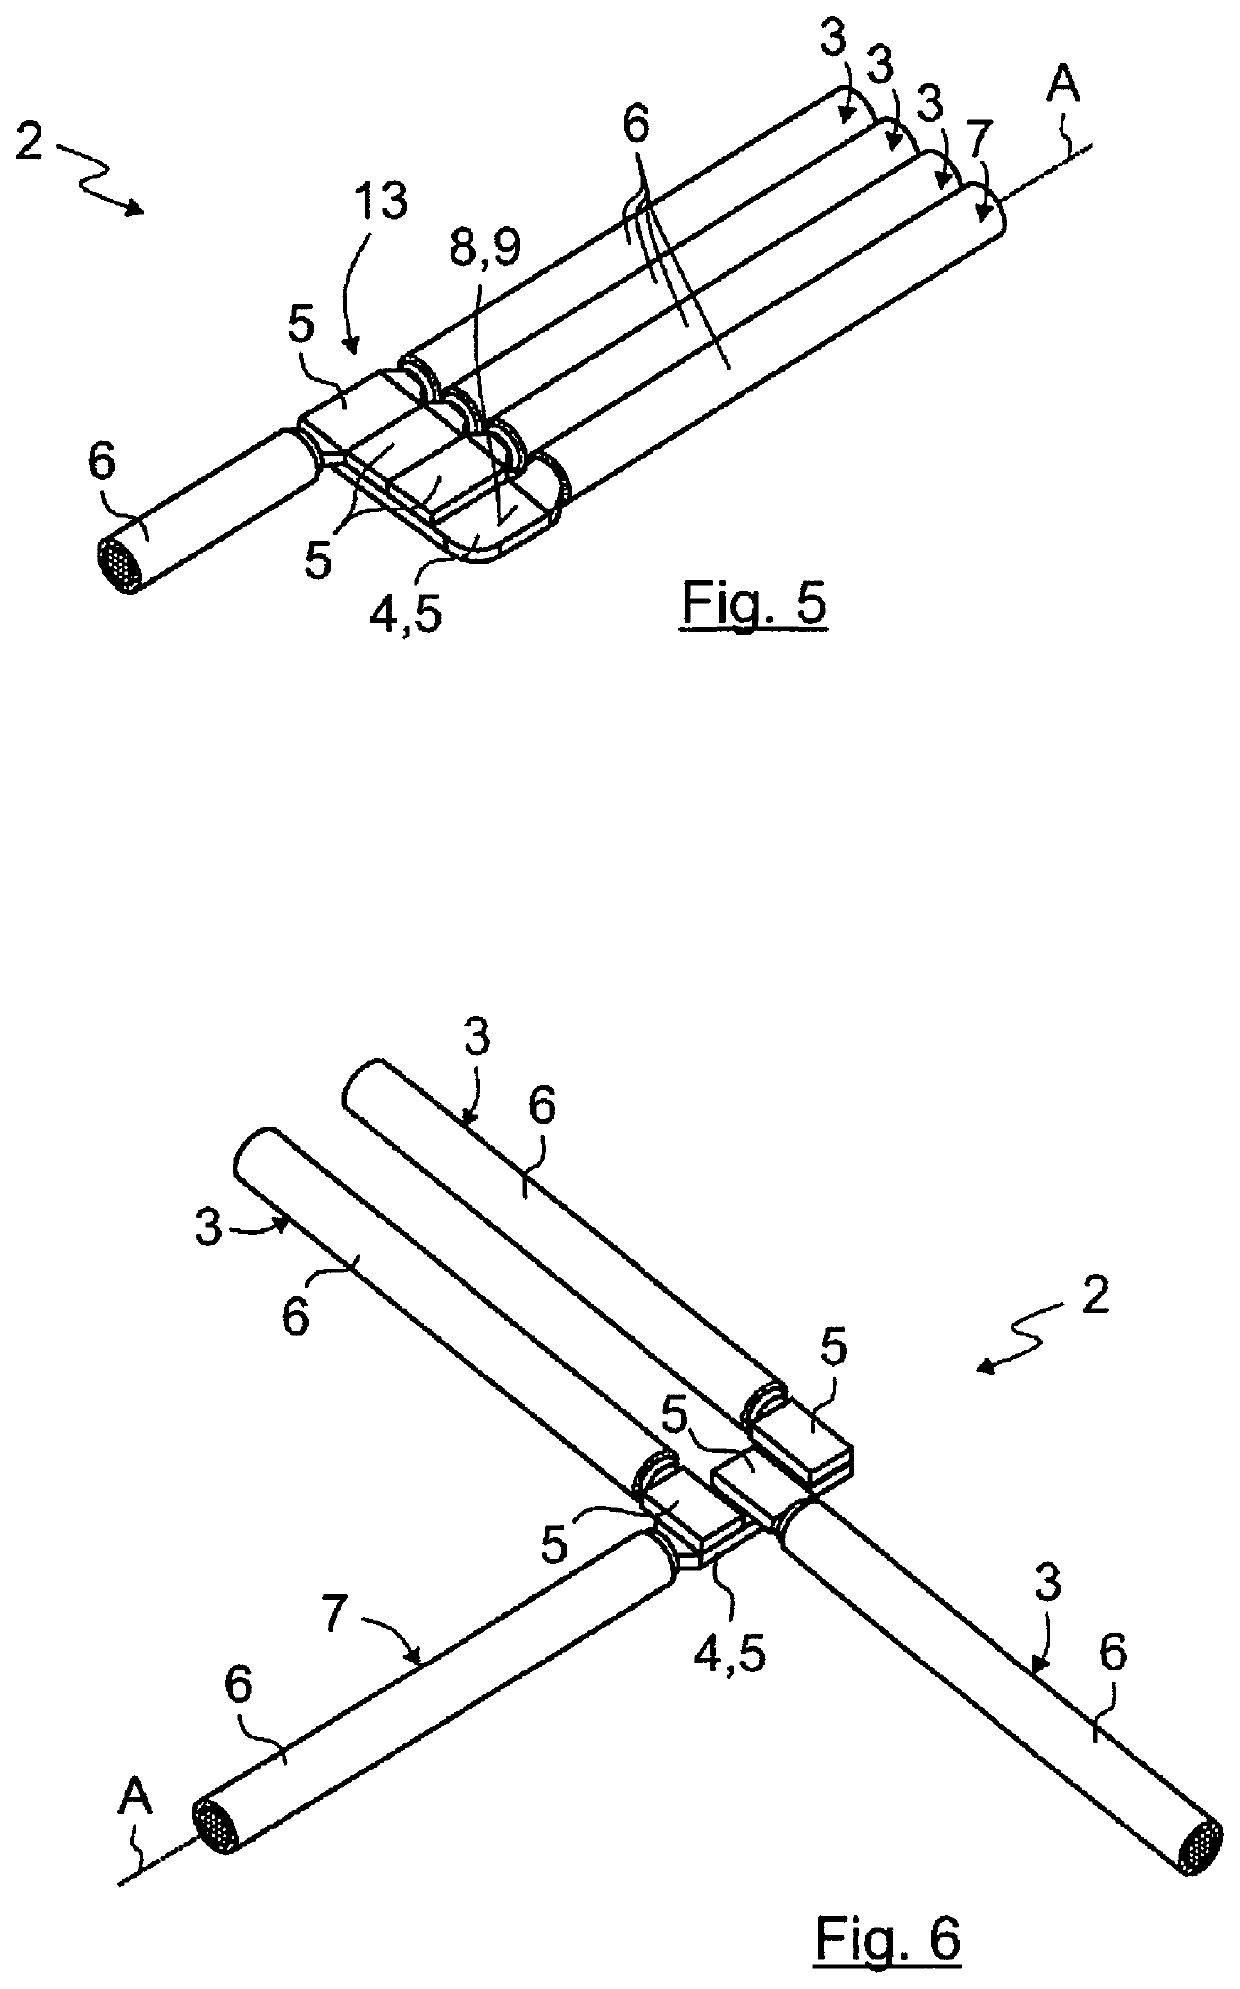 Cable Assembly and Method for Producing an Electric and Mechanical Connection